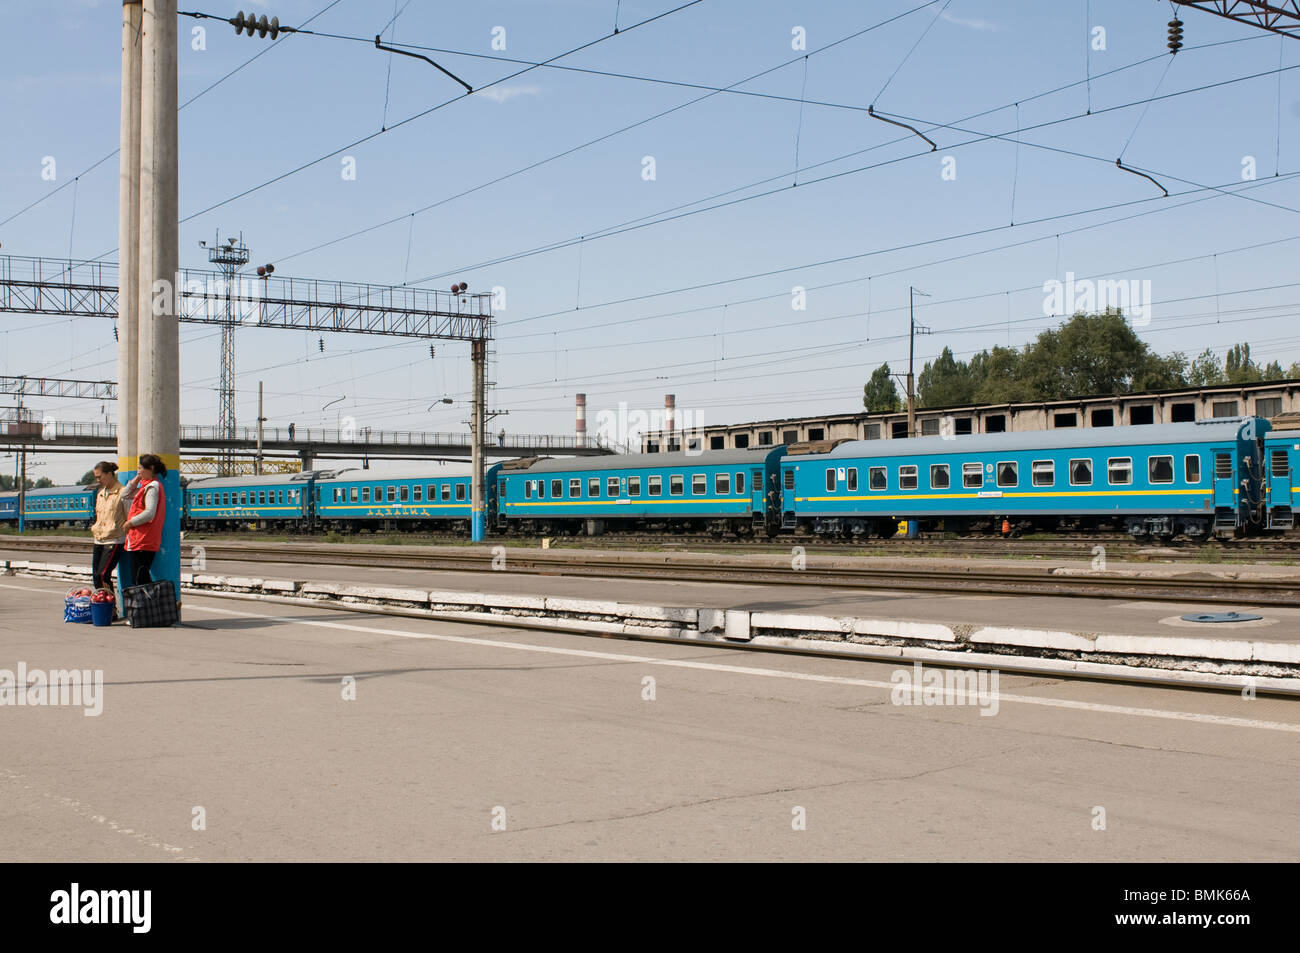 Railway station of Almaty with passengers and trains, Kazakhstan Stock Photo